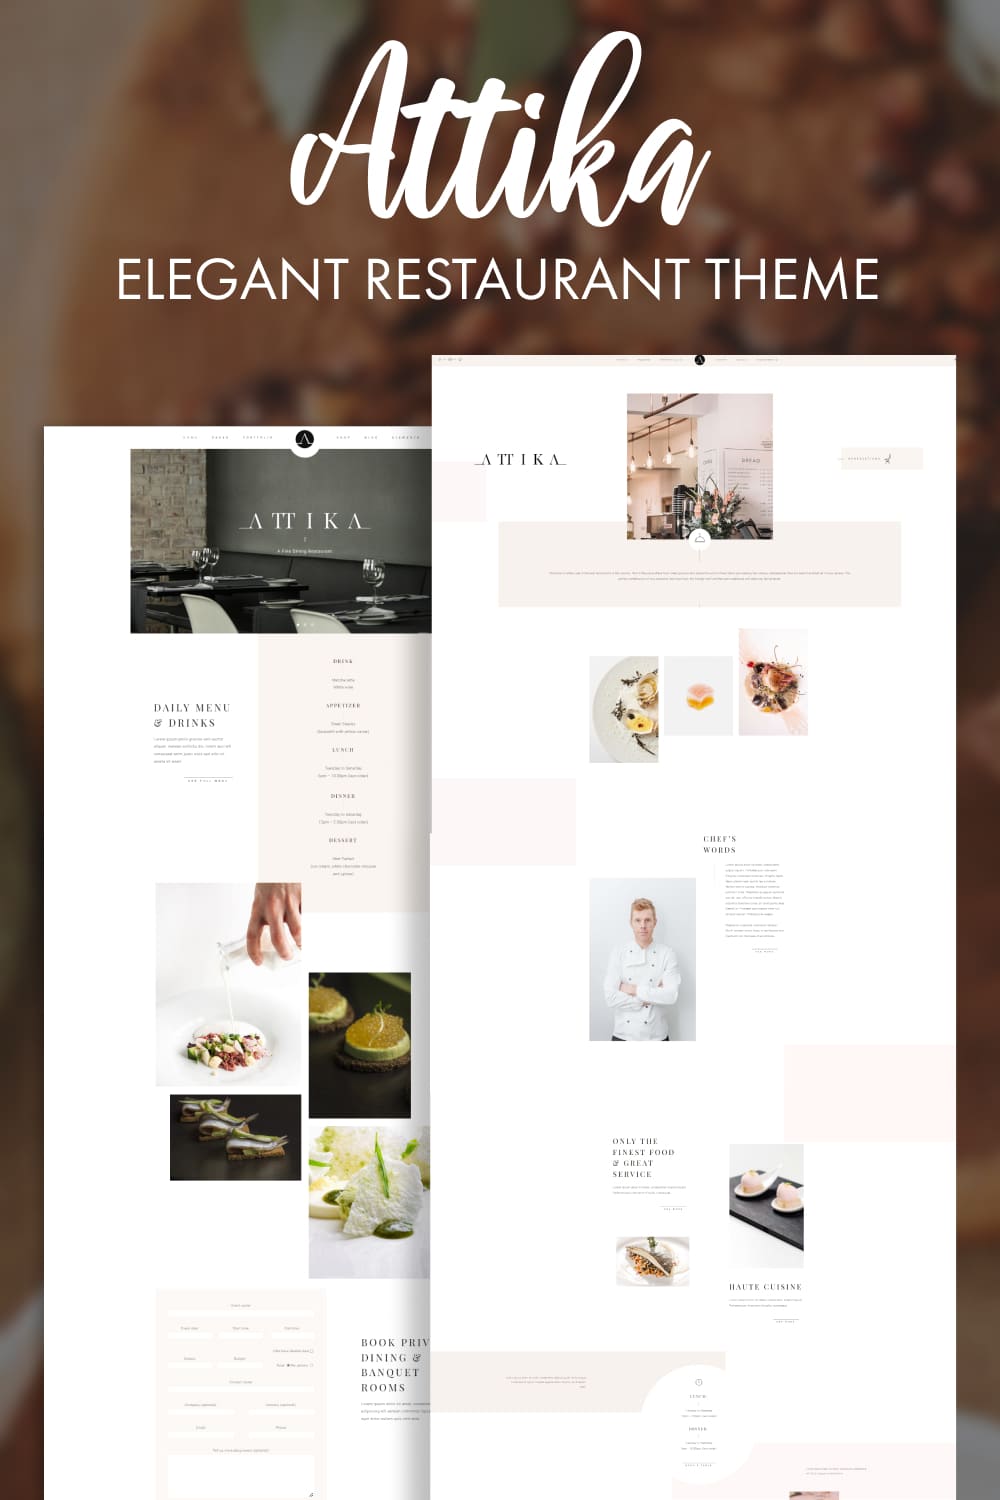 A collection of amazing restaurant theme WordPress page images.